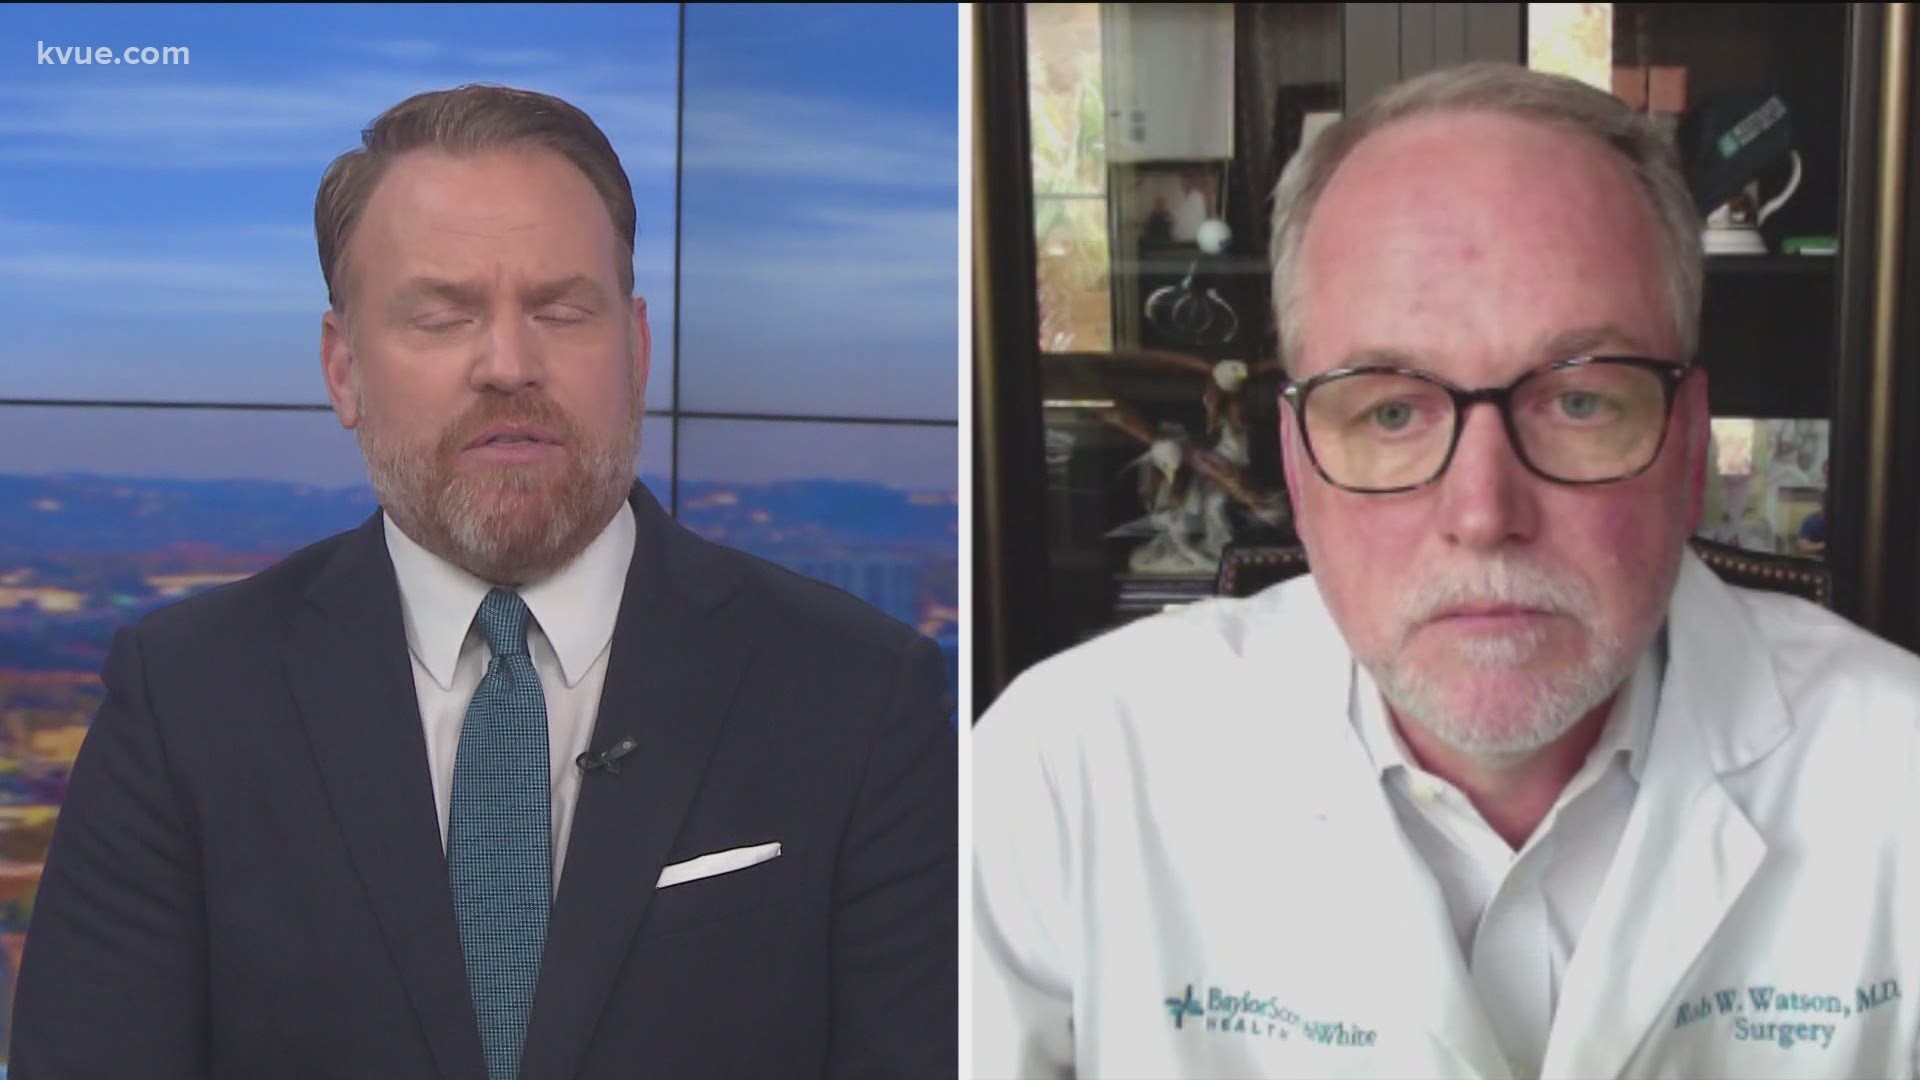 Dr. Rob Watson, chief medical officer for the Austin/Round Rock region of Baylor Scott & White Health, talked with KVUE'S Bryan Mays about his advice.